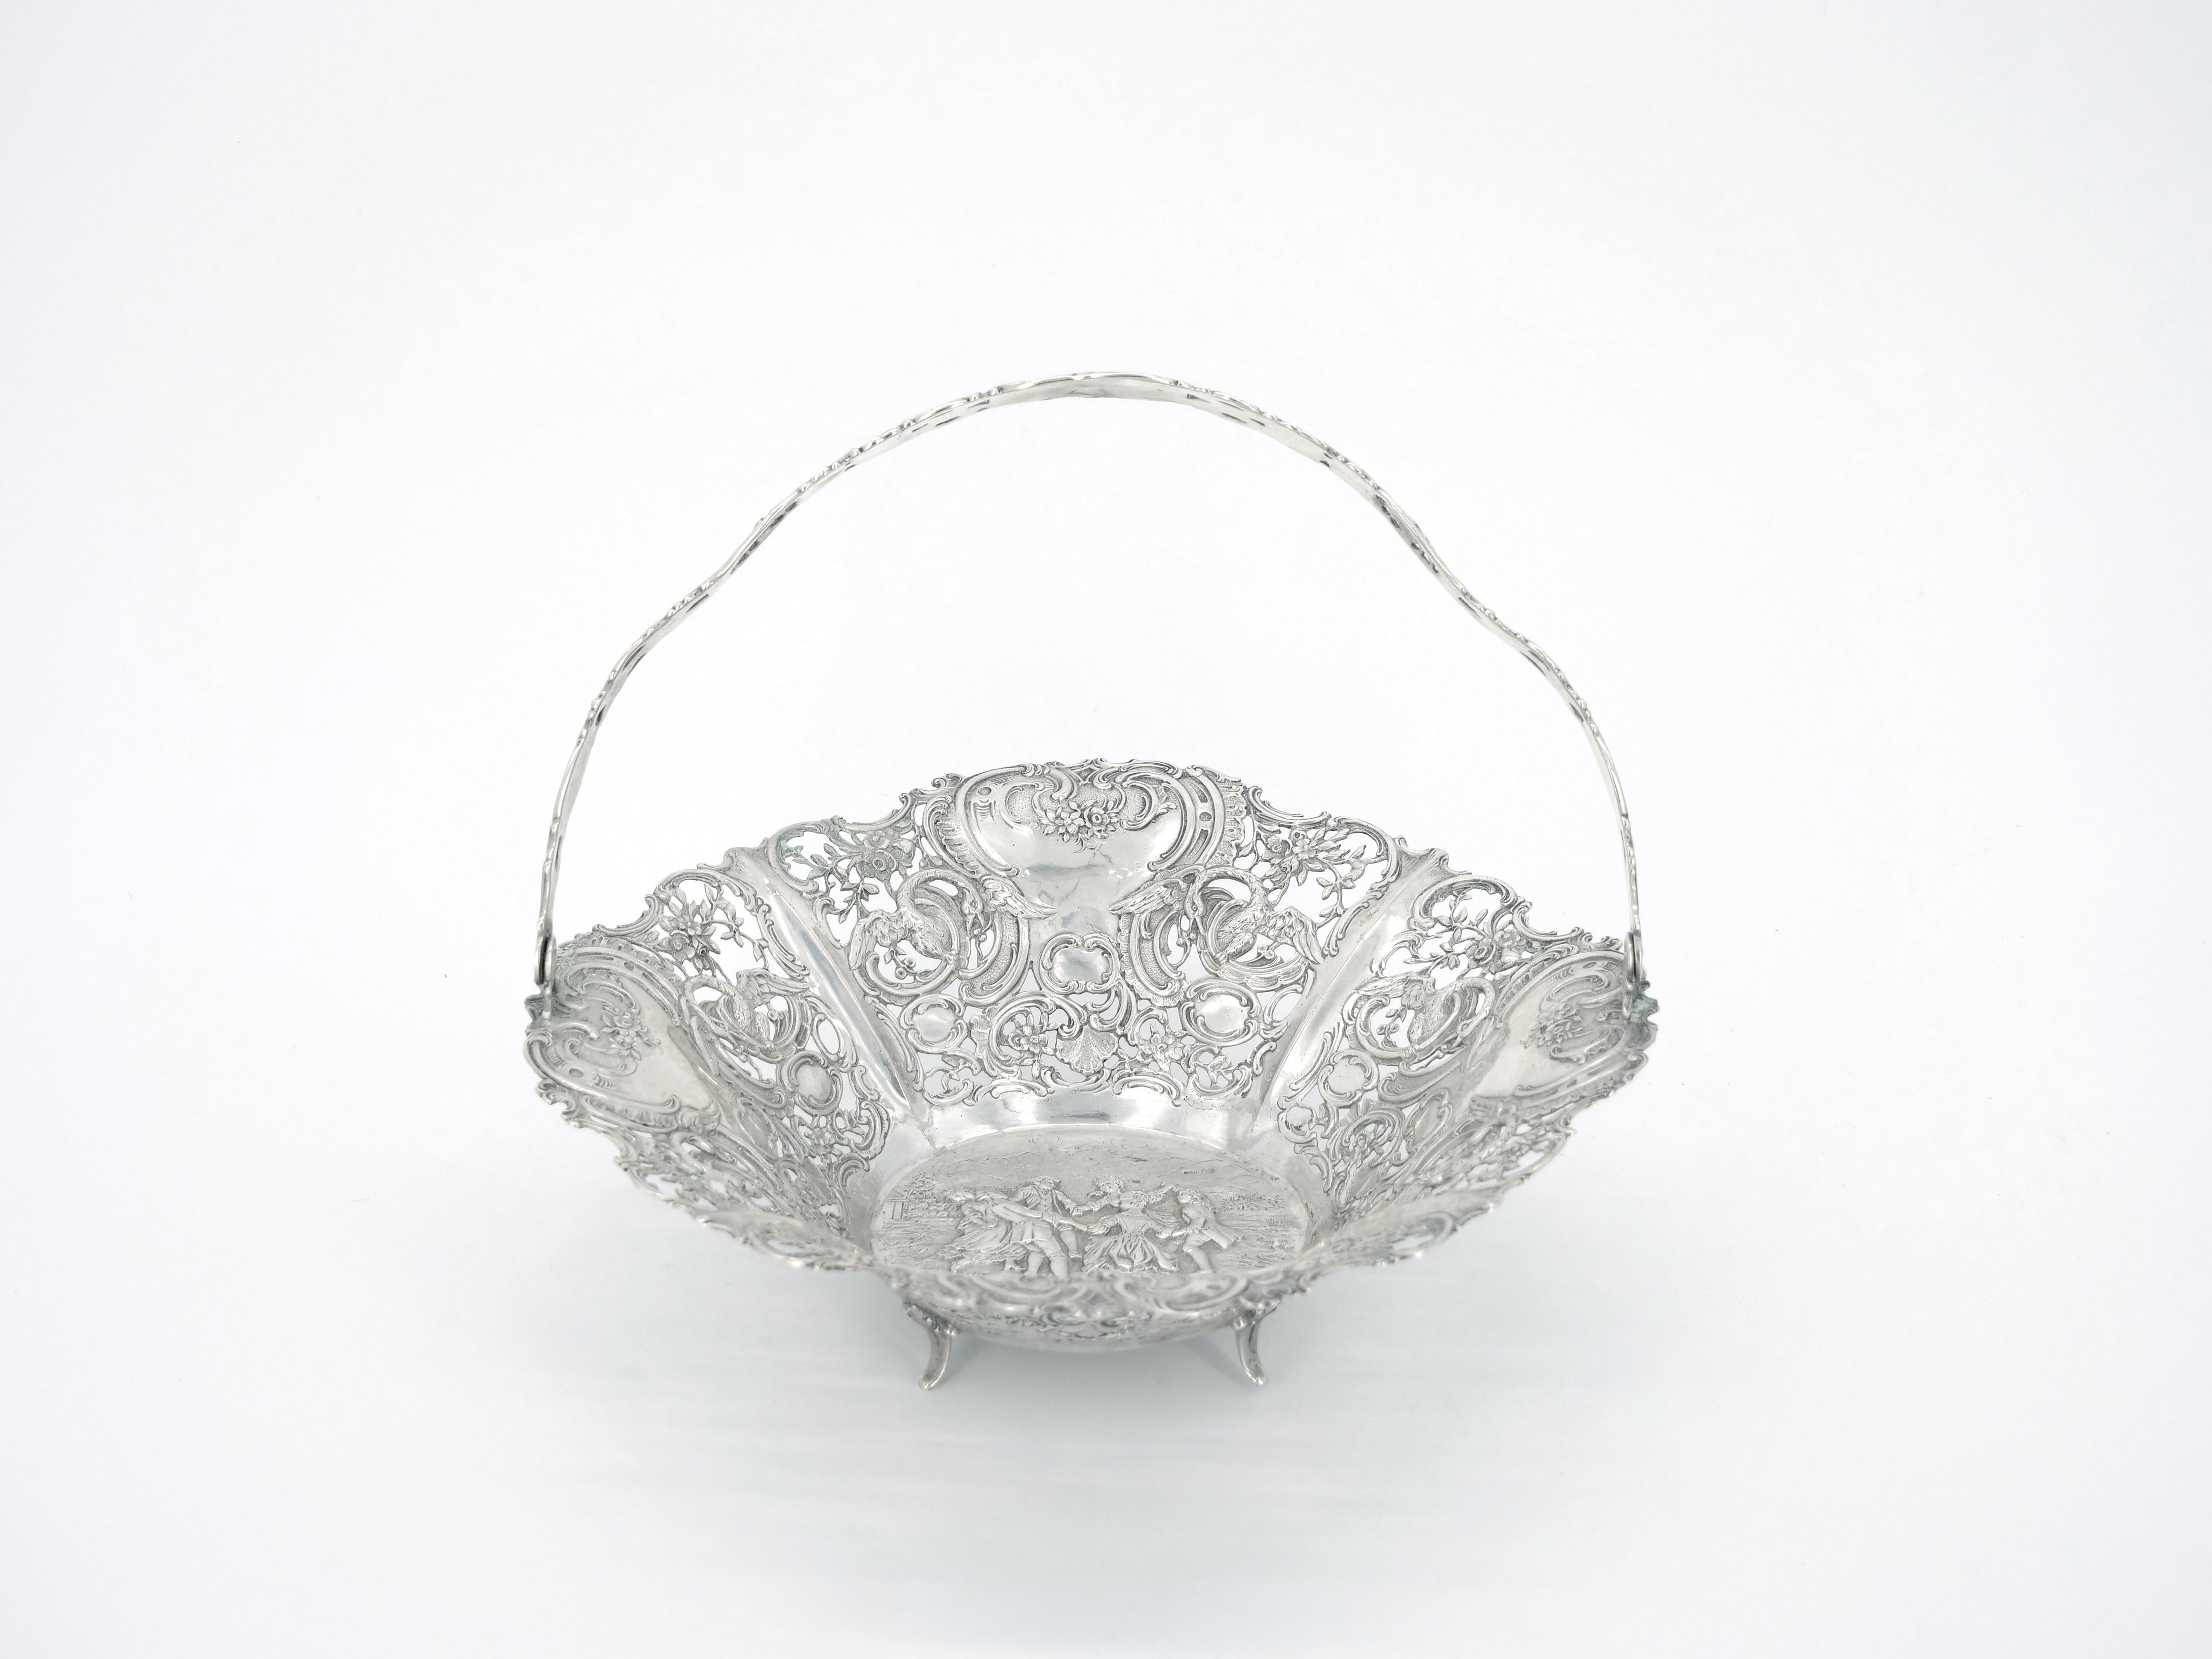 
Experience the extraordinary craftsmanship of the early 19th century with our magnificent German sterling silver basket. This captivating piece showcase an exquisitely ornate all-over hand-engraved design that is truly a work of art. Immerse